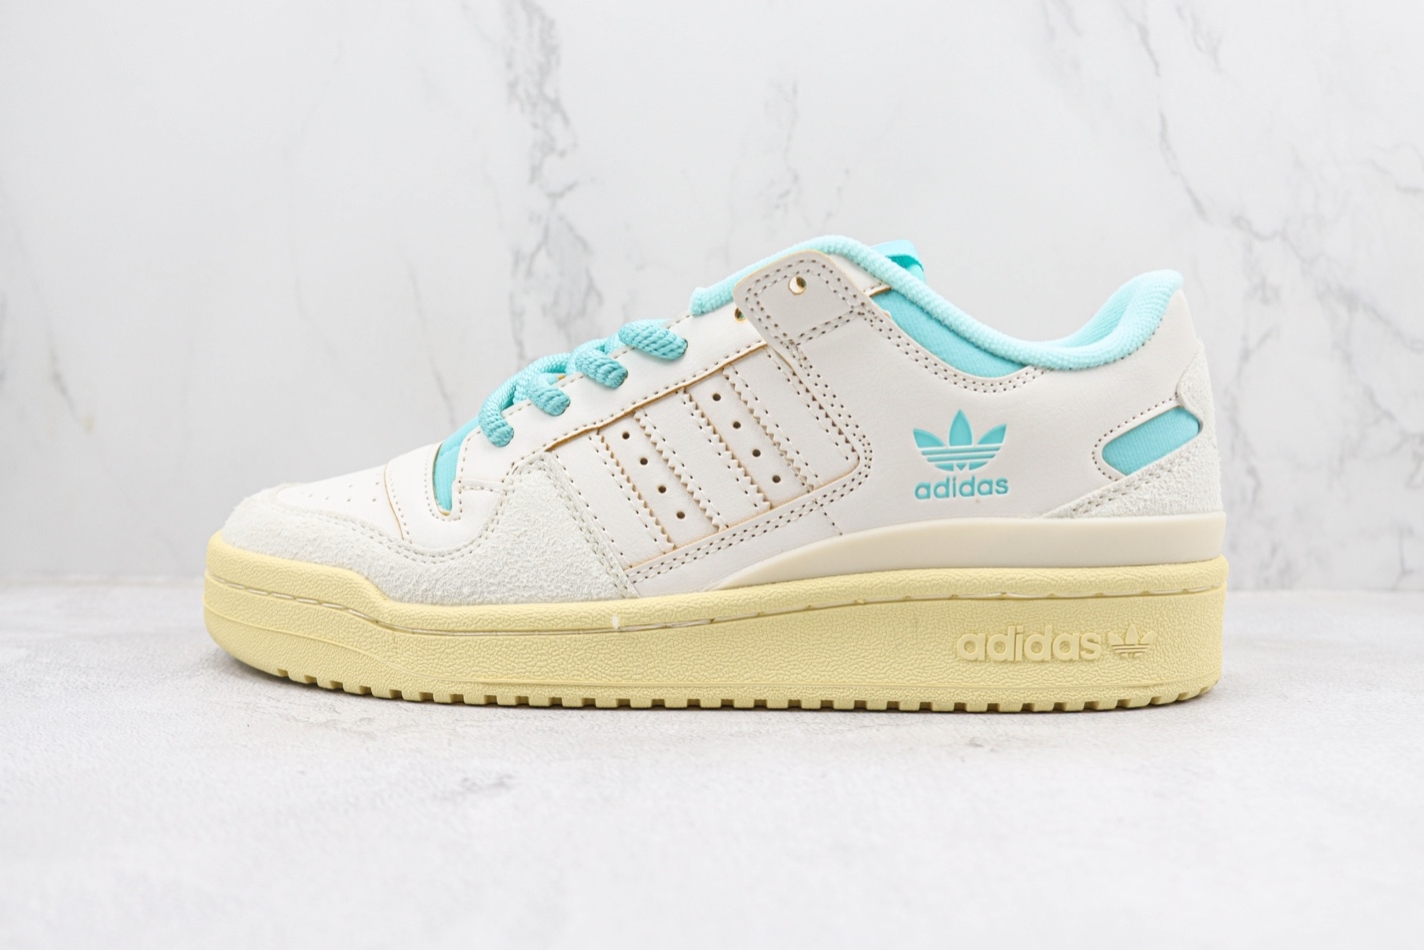 Adidas Originals FORUM 84 Low CL 'Off White' - Trendy Sneakers for Ultimate Style